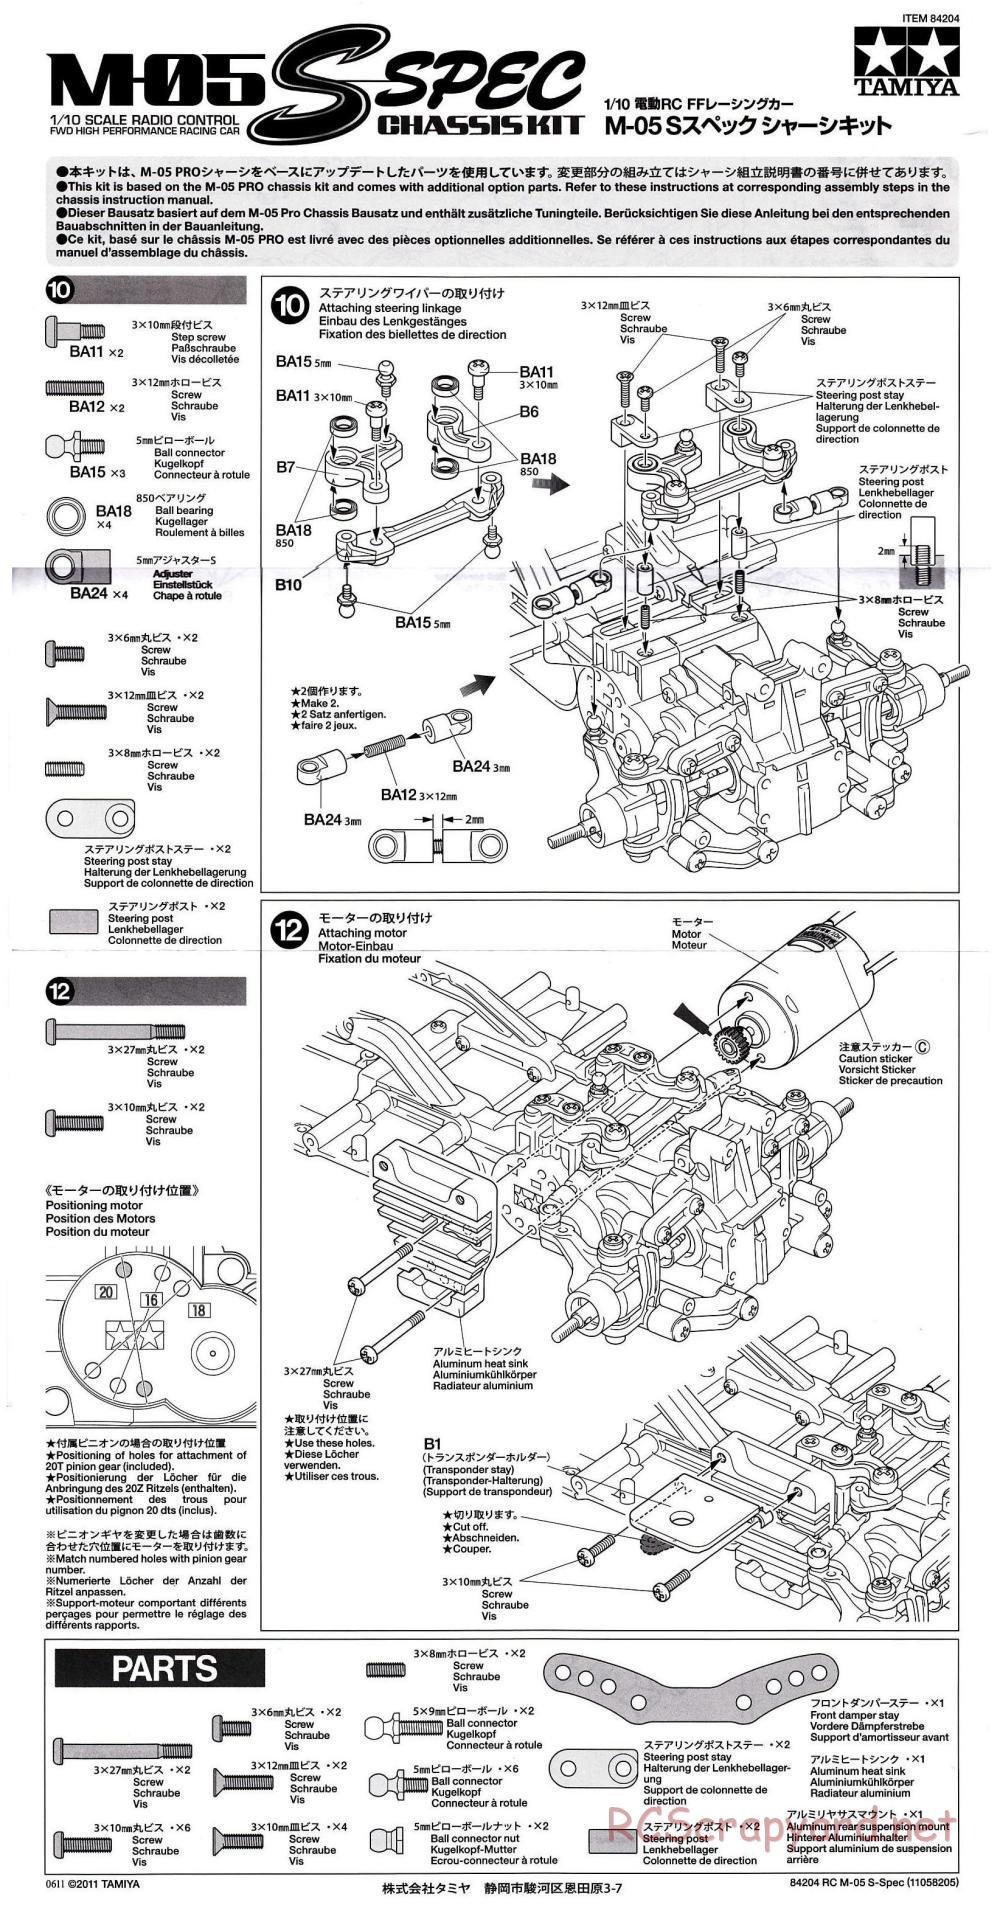 Tamiya - M-05 S-Spec Chassis - Manual - Page 2